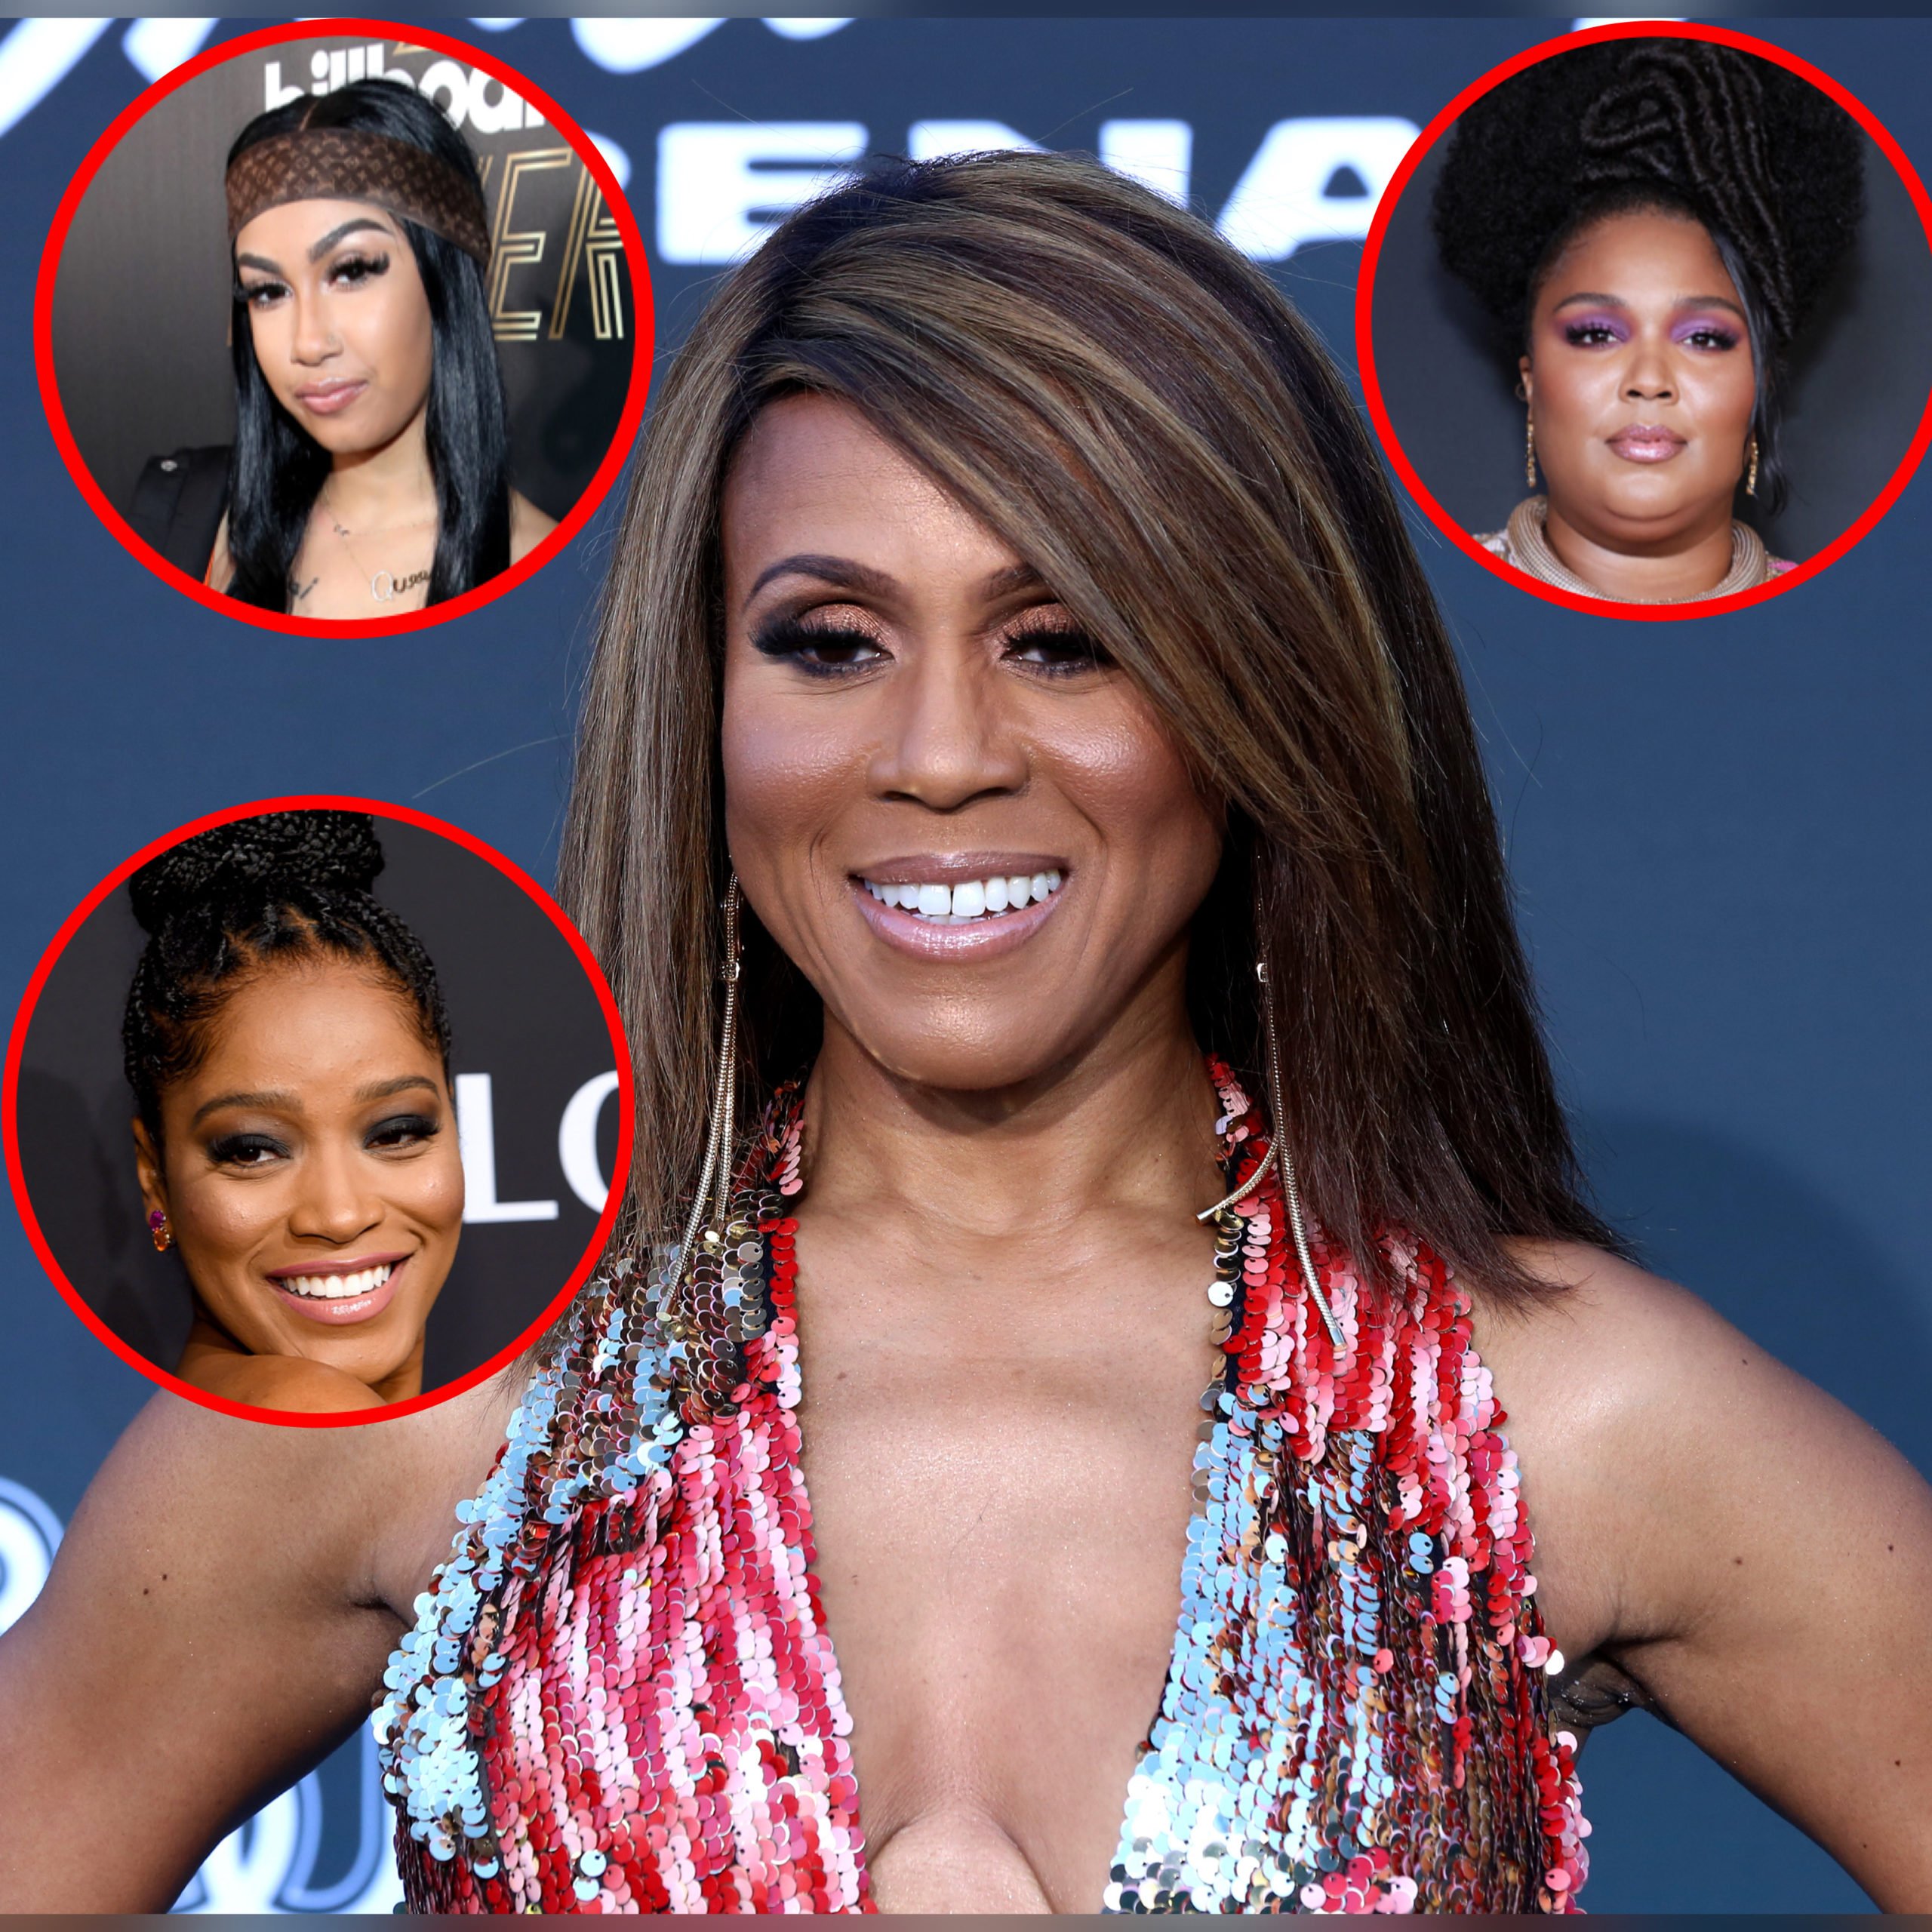 Do These Celebrities Have The Range? Here’s Who Tried Their Hand At The Deborah Cox Challenge